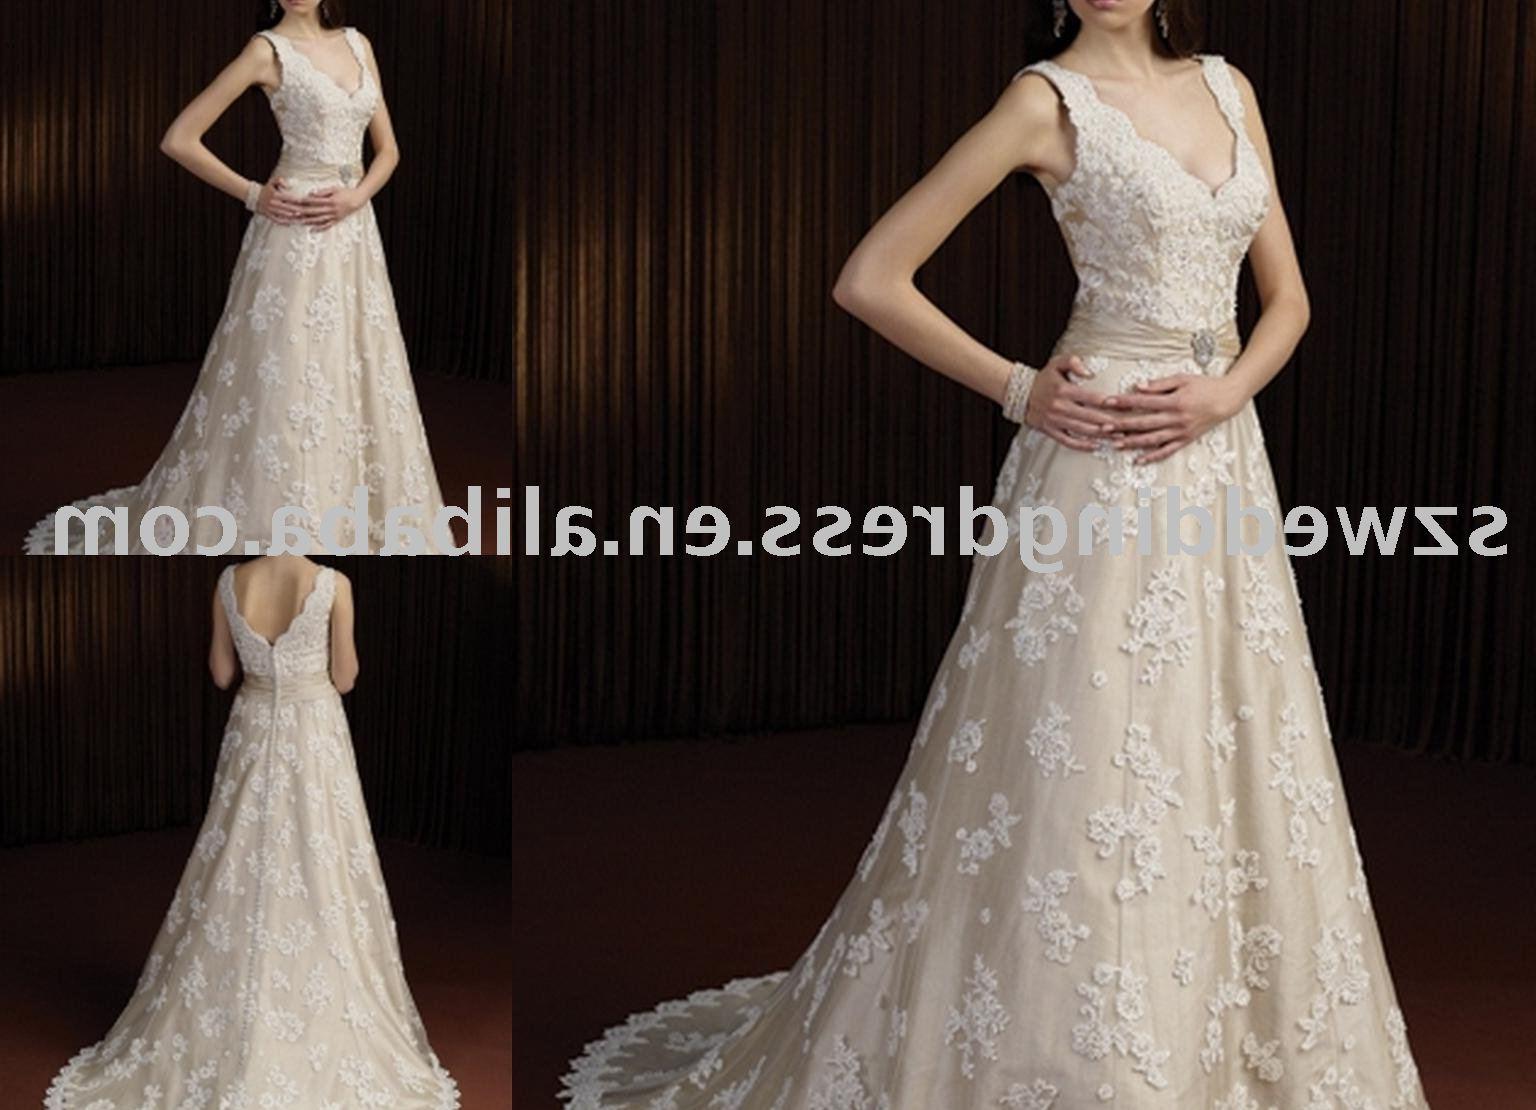 Free Shipping wedding gowns: